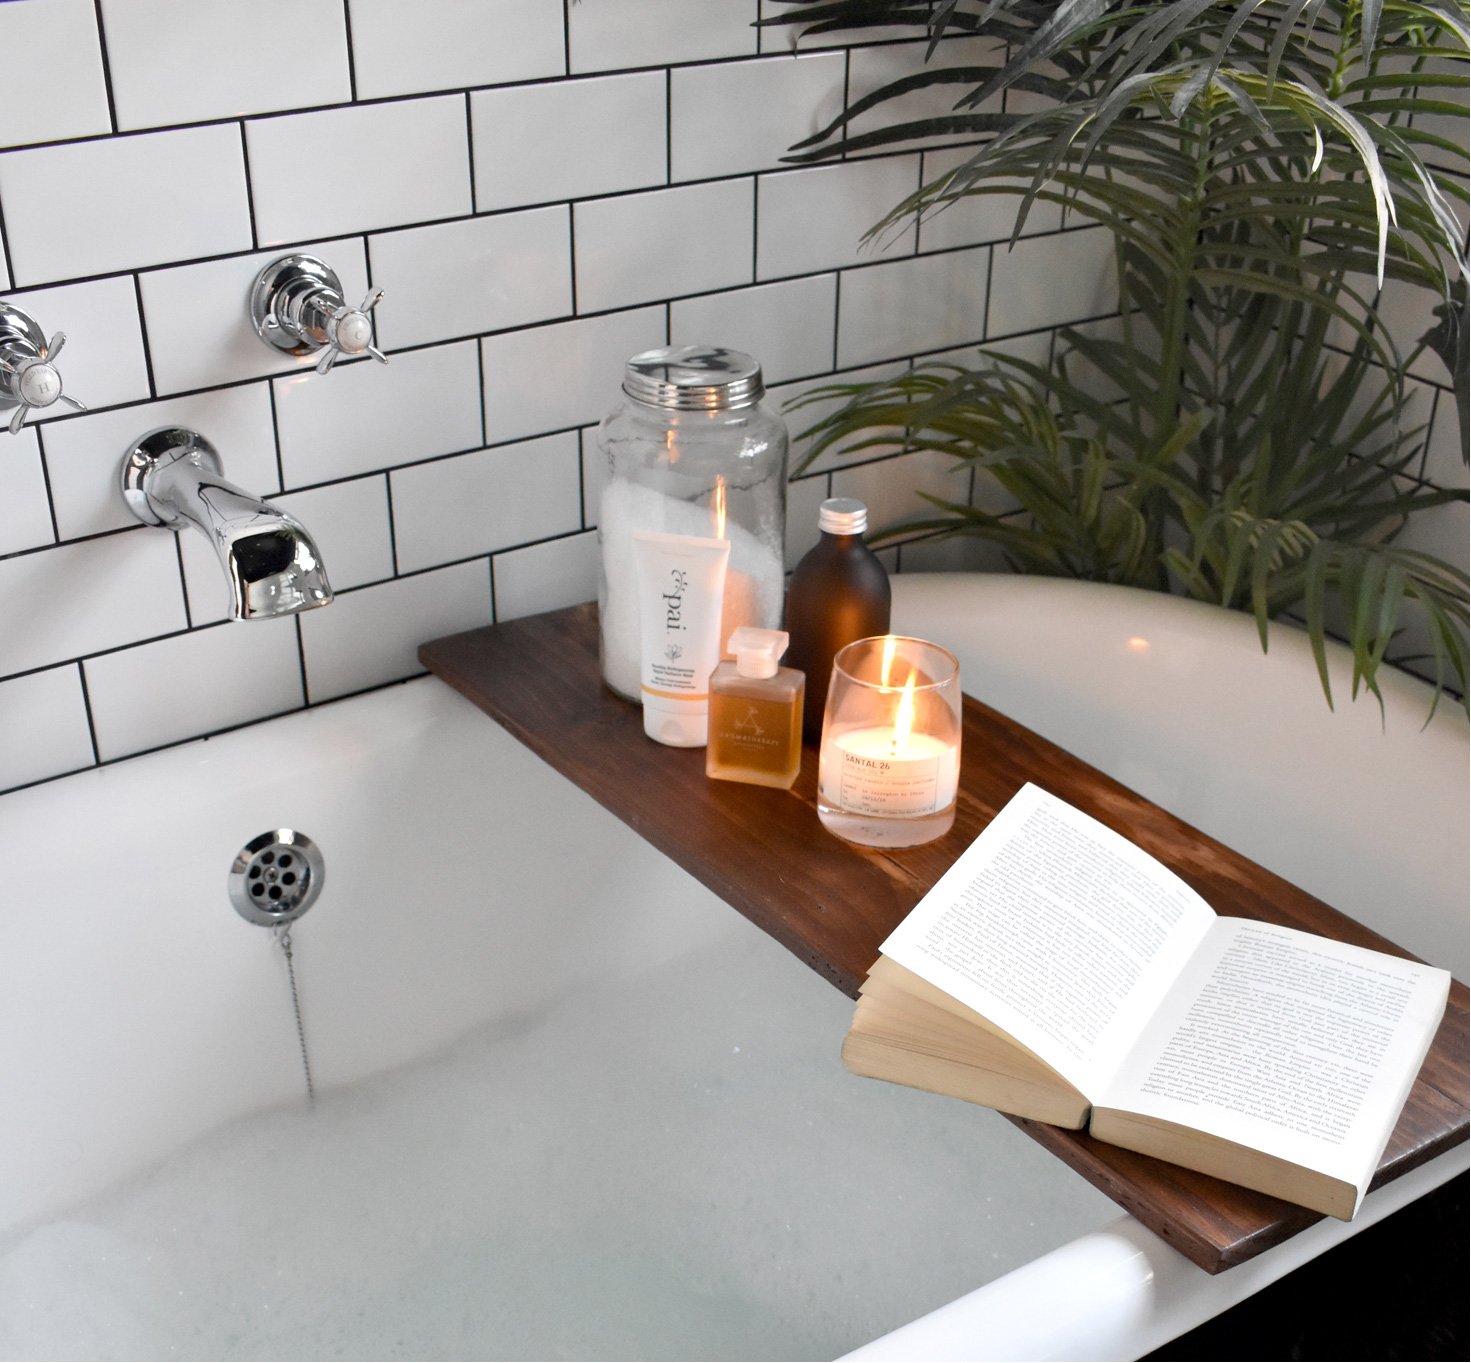 Relaxing at home with a bath, a book.